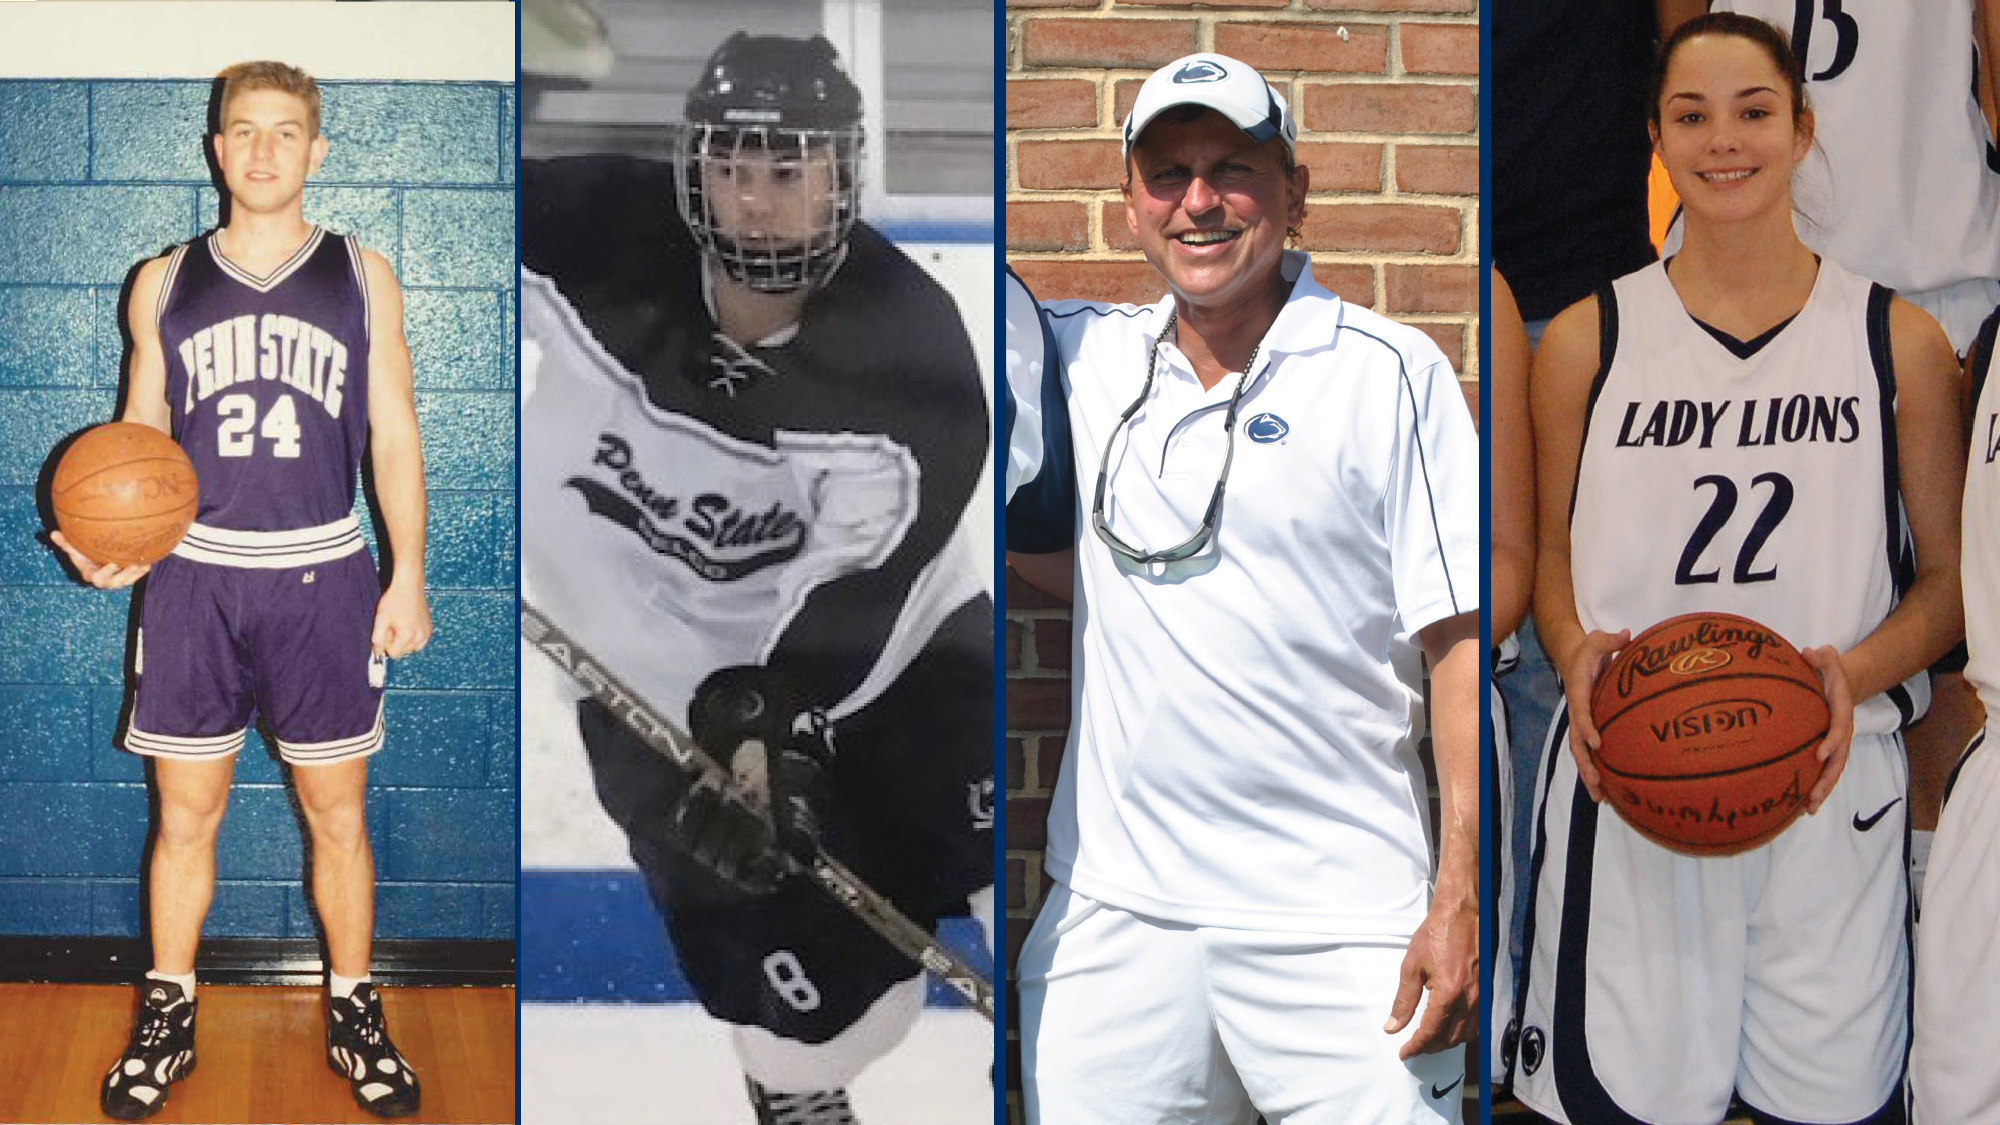 Jeff Danzi, Nick Gallo, Lloyd Vernon and Cara Zibelman will be inducted into the Brandywine Athletics Hall of Fame in January